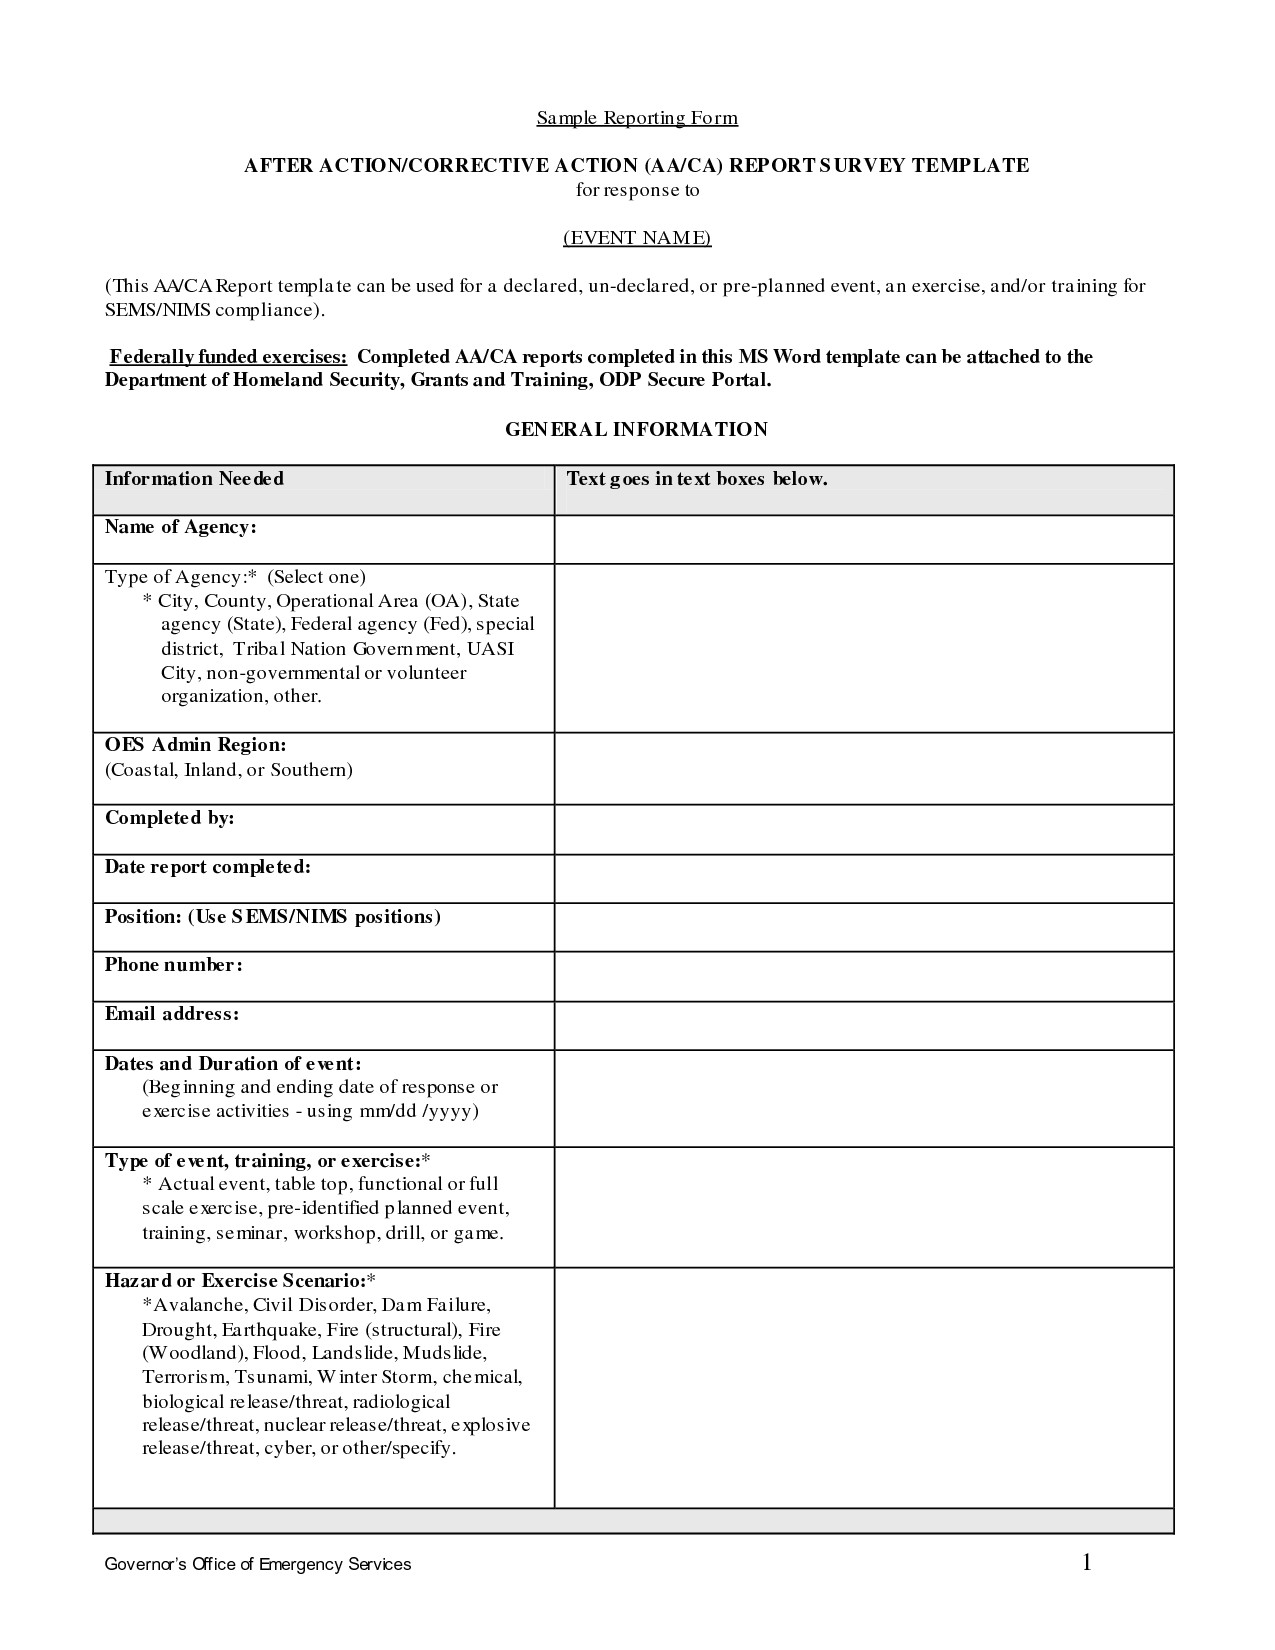 Military after Action Review Template williamsonga.us